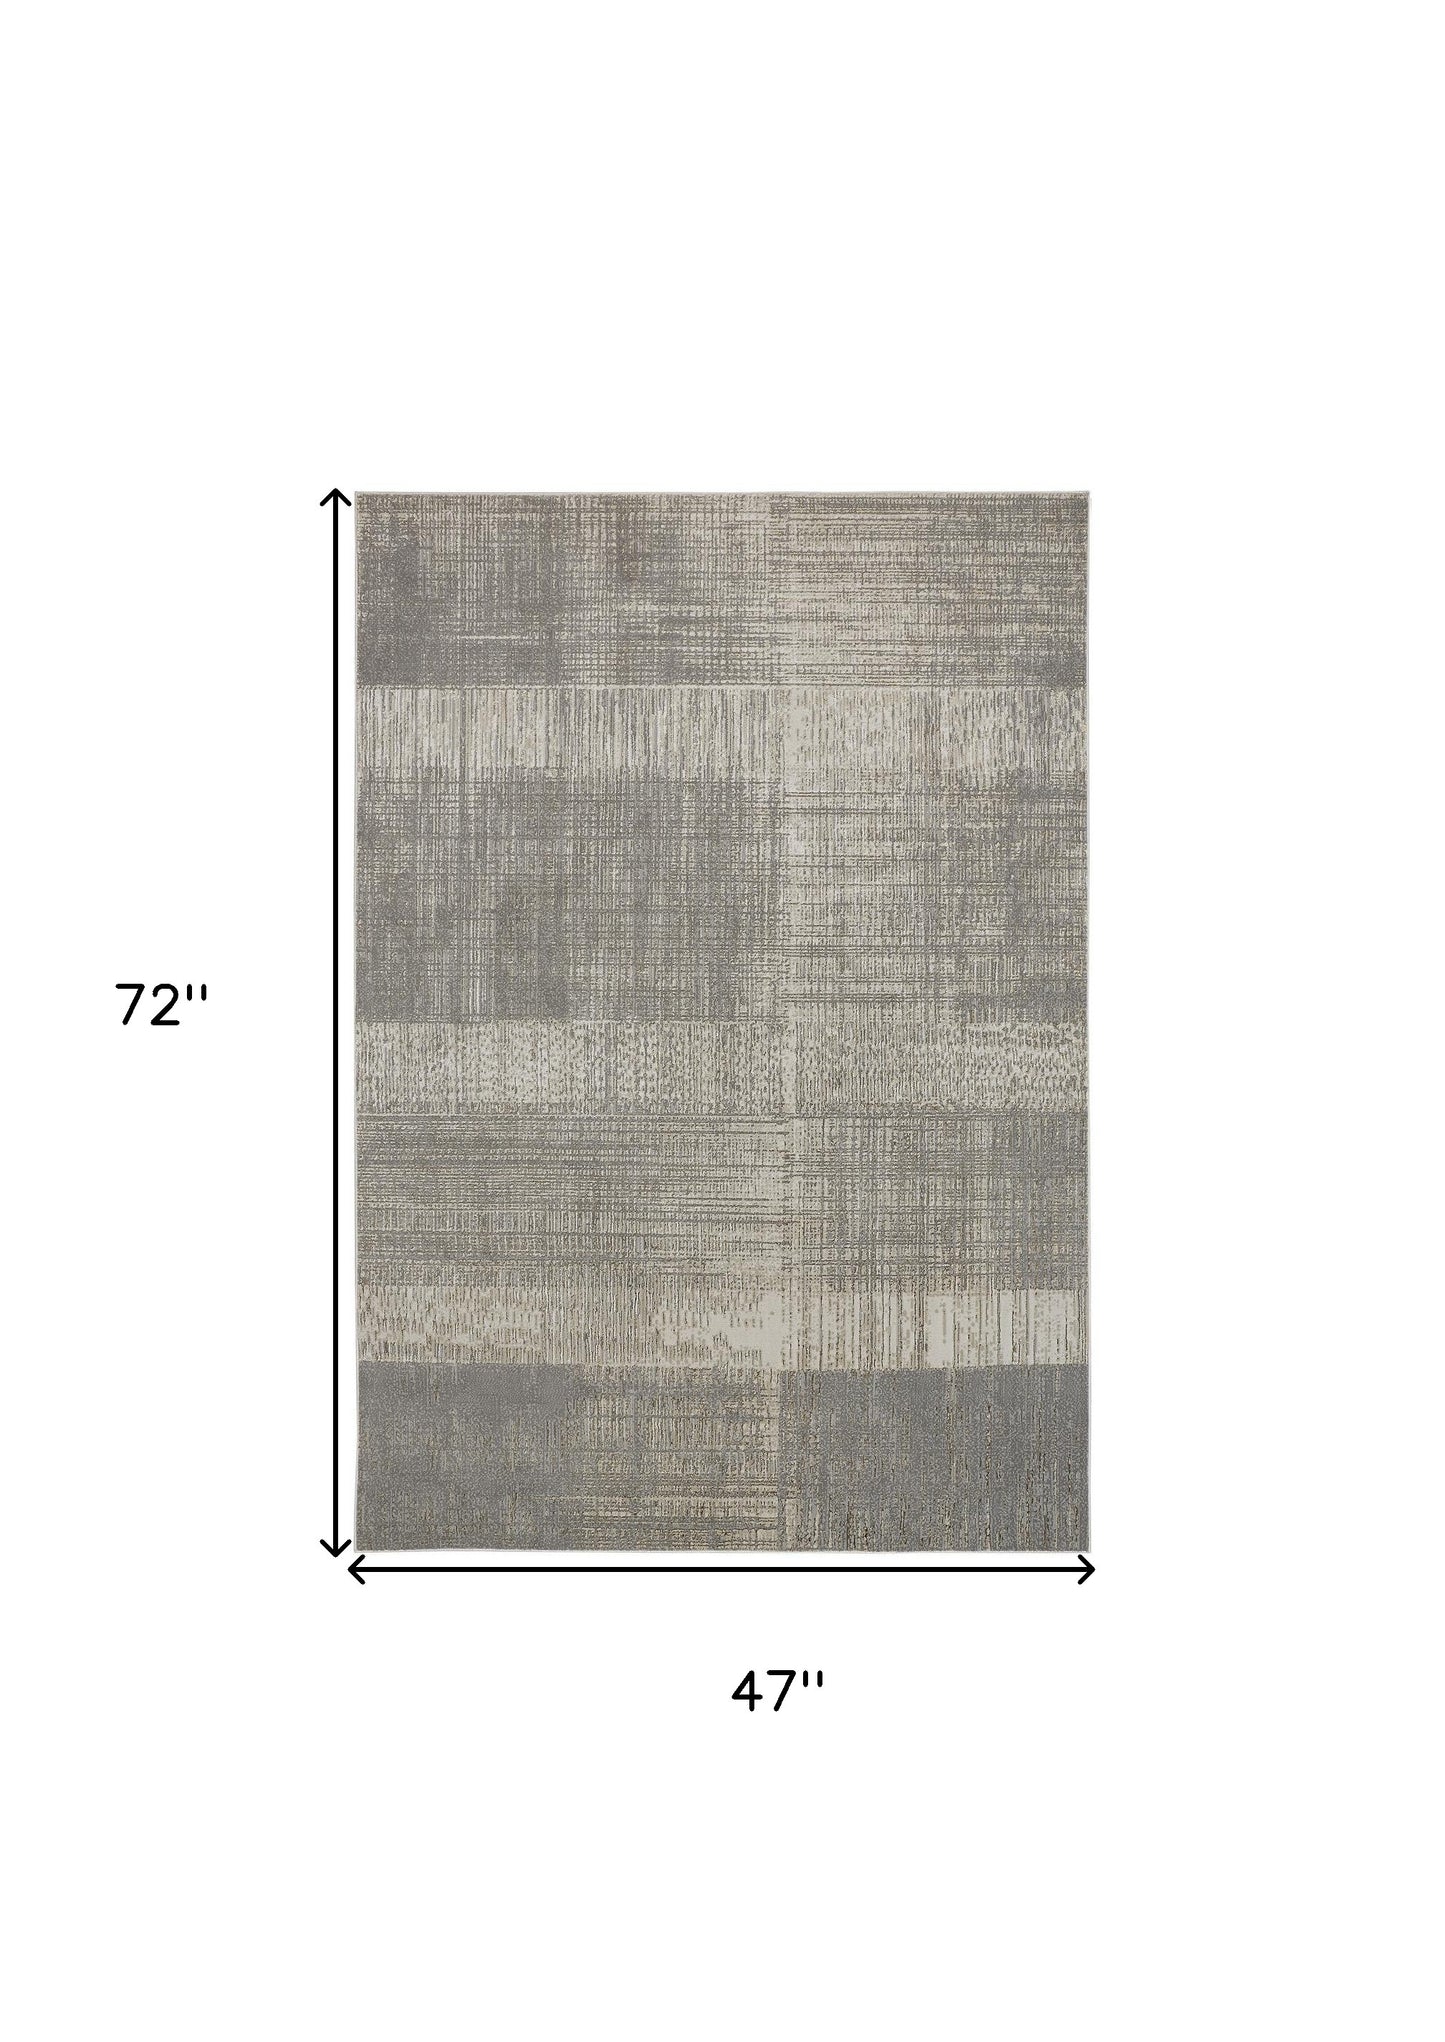 5' X 8' Gray And Ivory Abstract Stain Resistant Area Rug